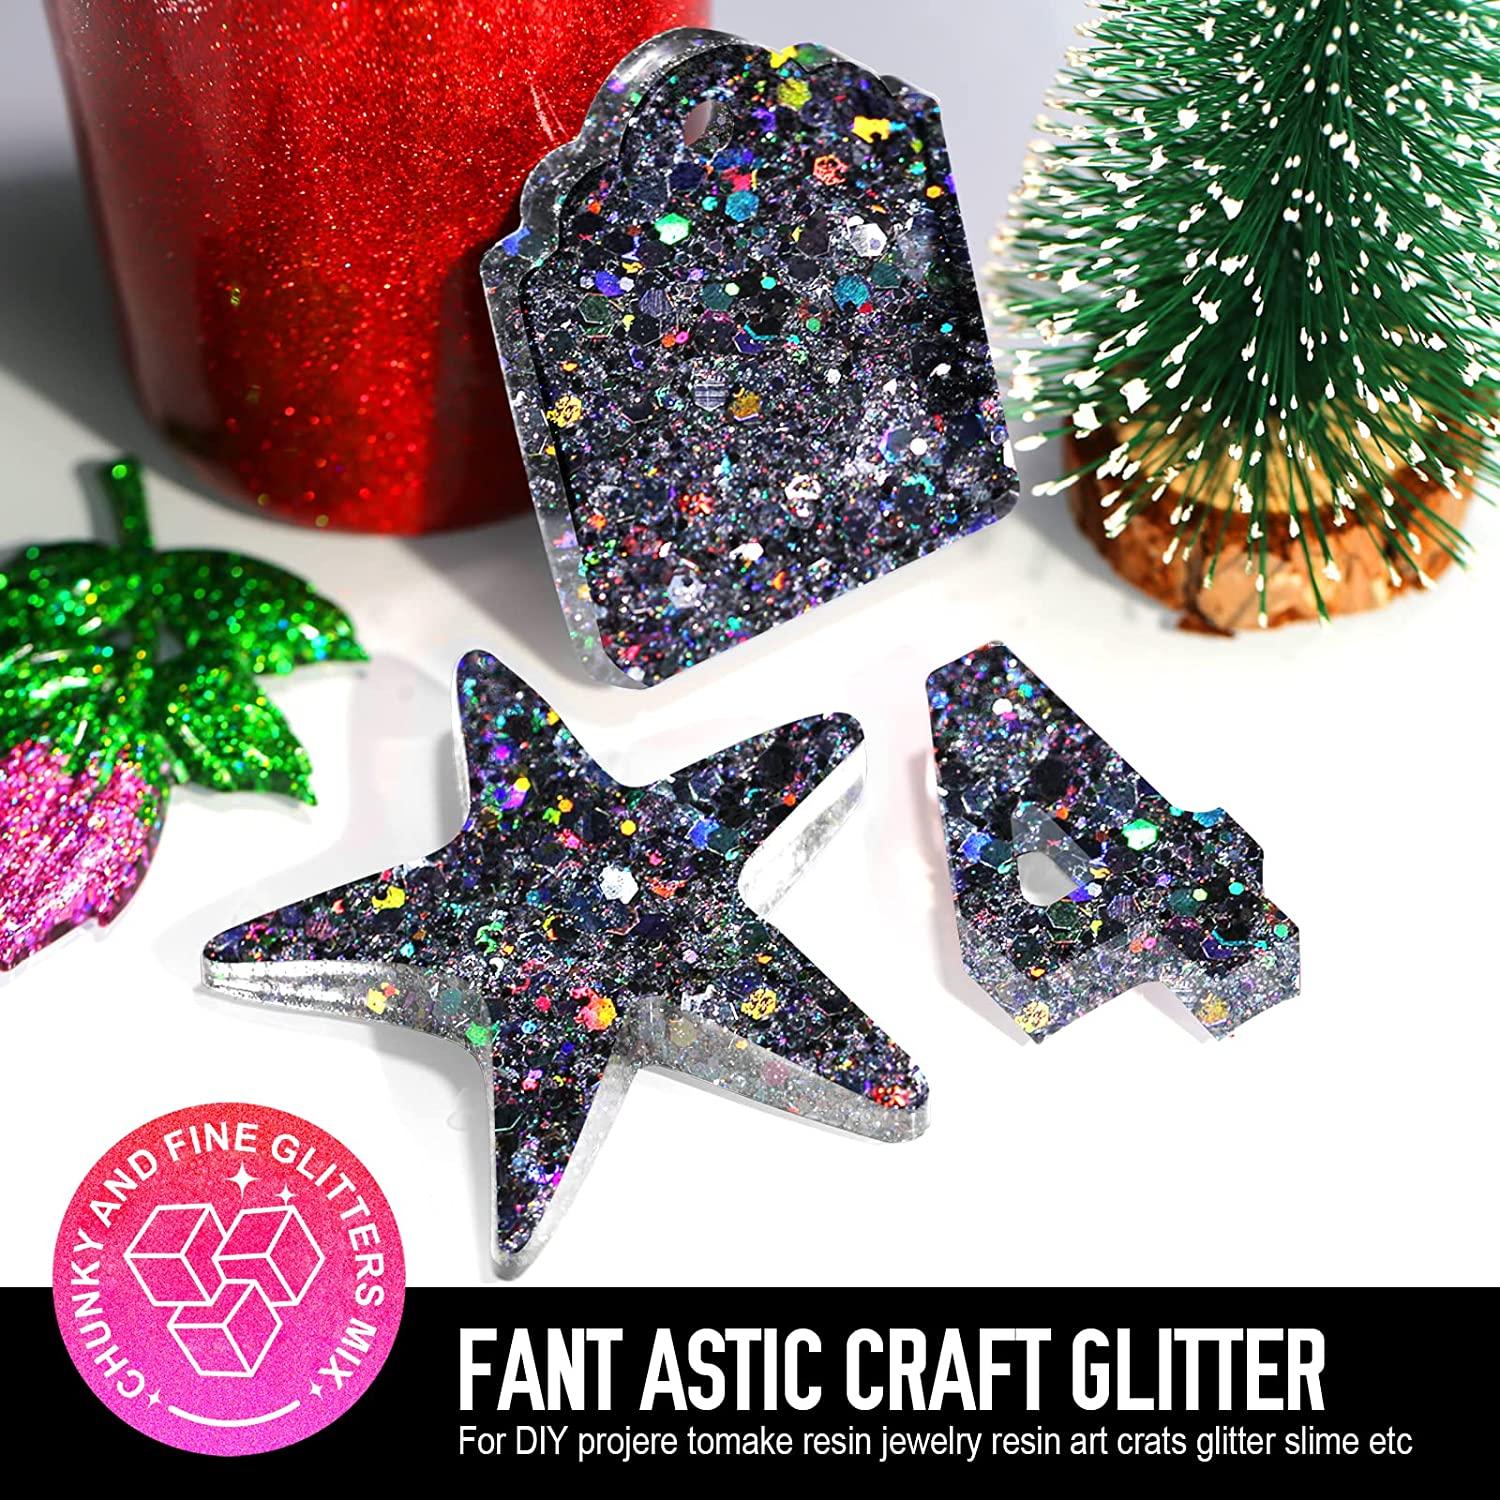 Glitter, Teenitor Fine Glitter, for Slime, Art and Crafts, Nail